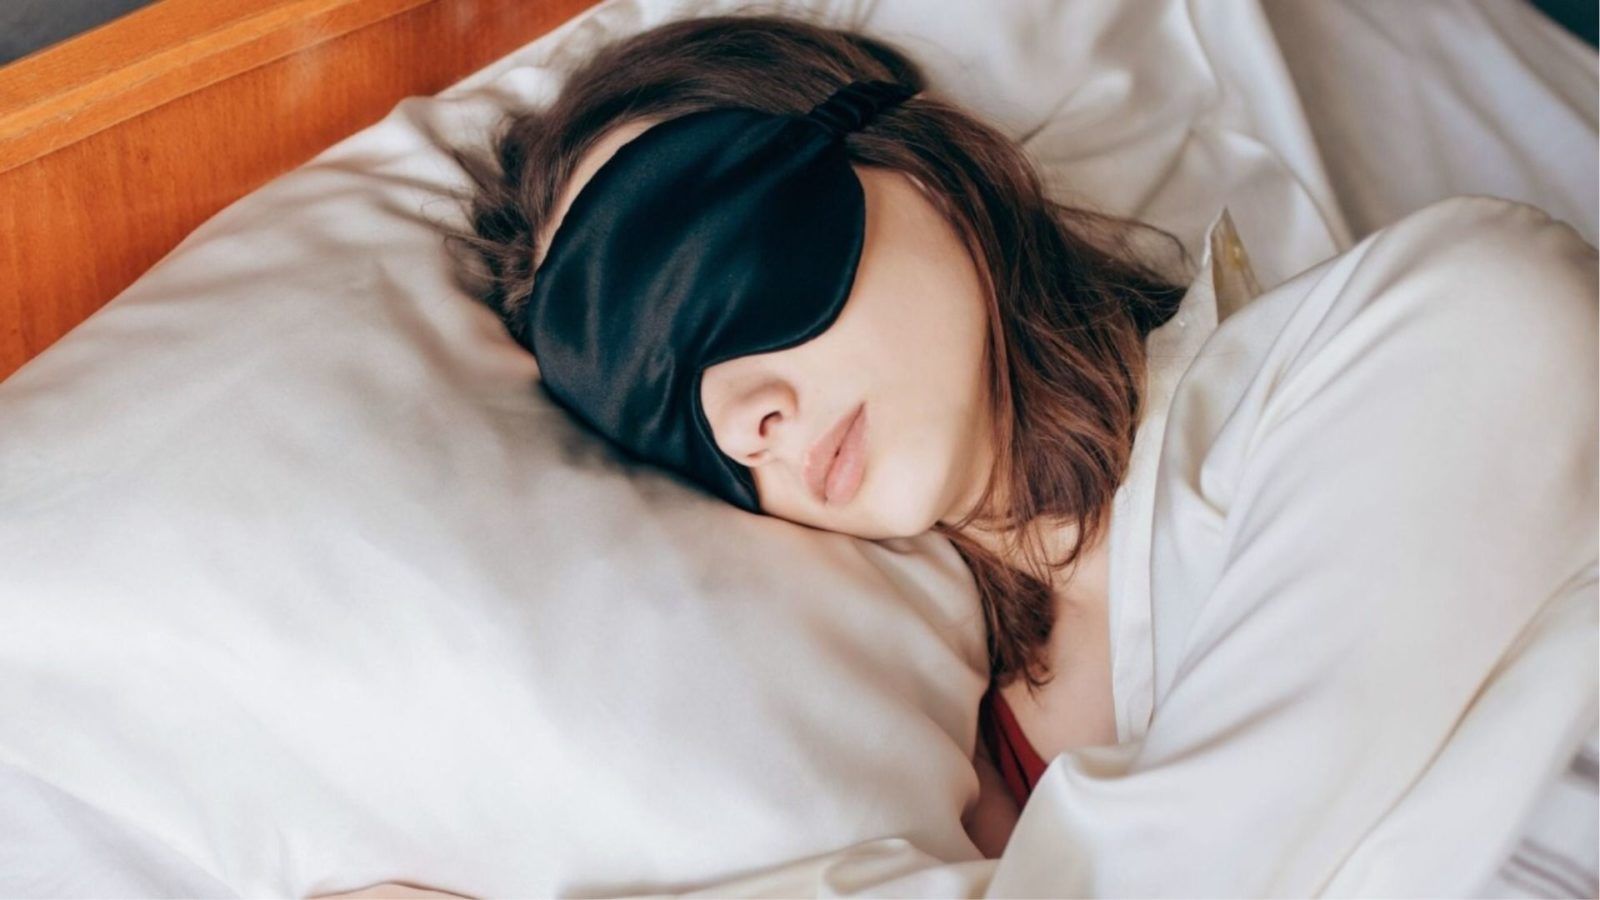 Does sleeping on a silk pillowcase really lead to better hair days?